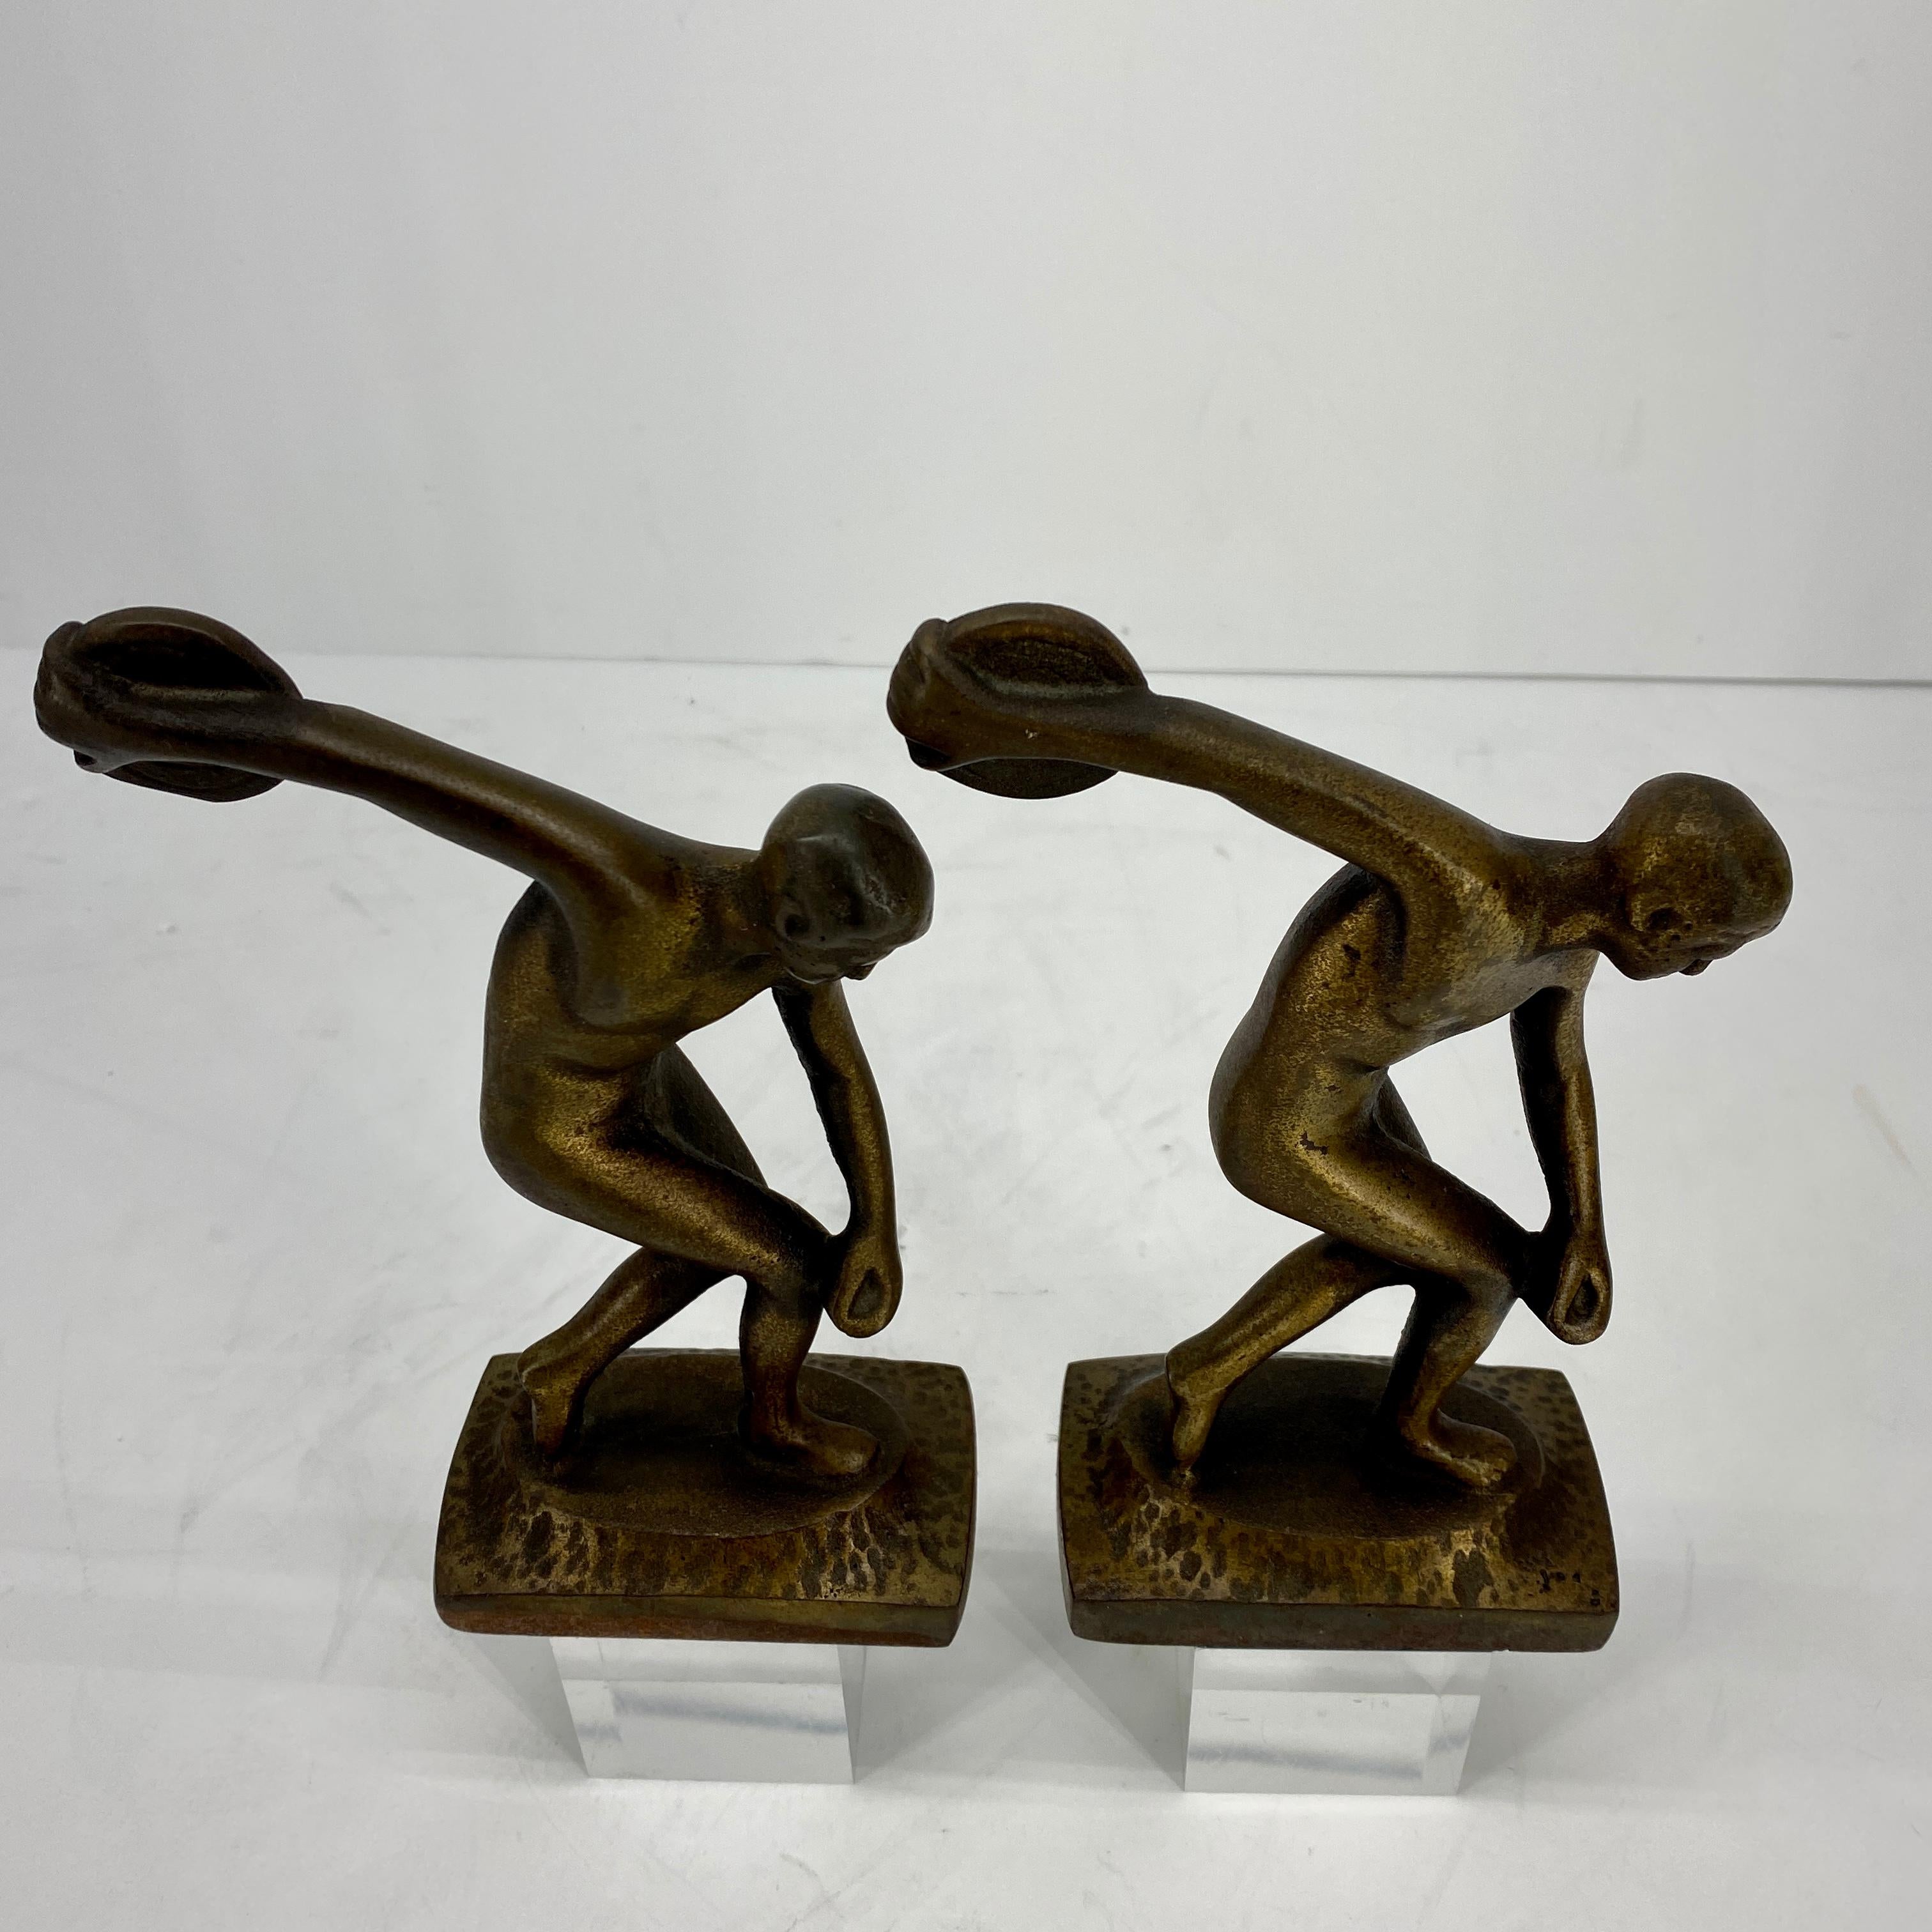 Vintage Cast Iron and Bronzed Overlay Bookends of Male Discus Thrower 2